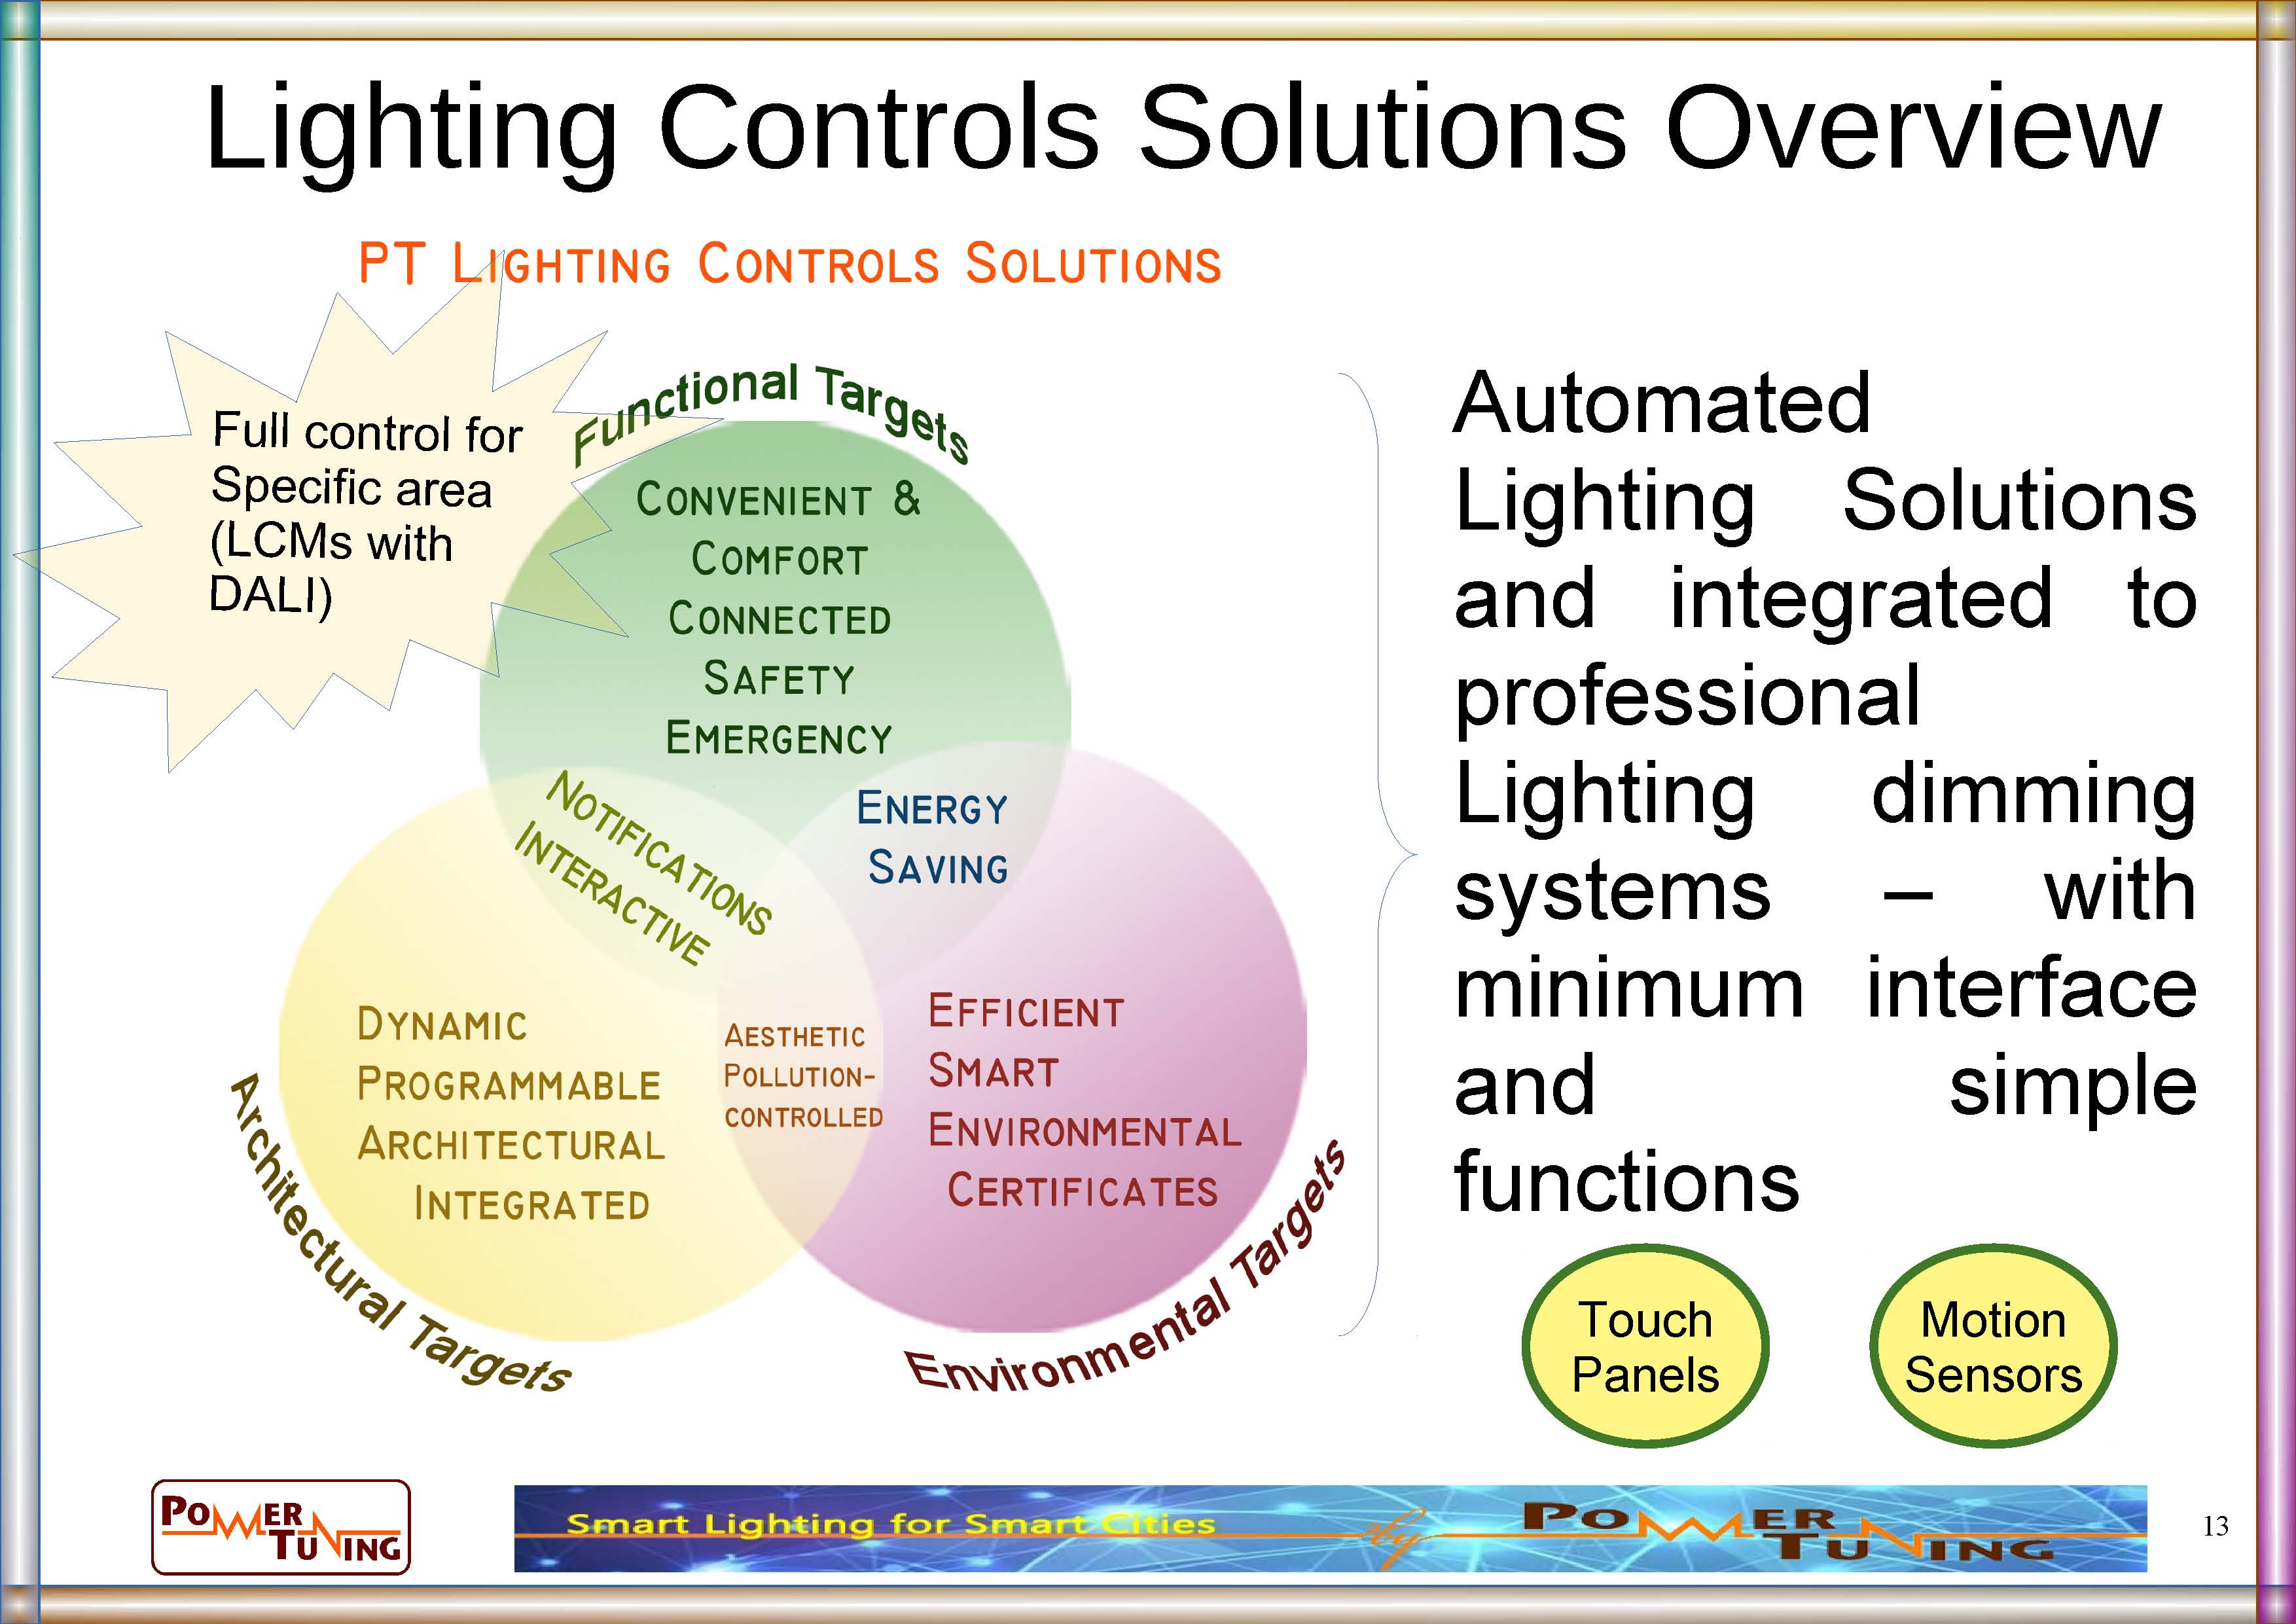 For applications with several circuits to be dimmed or switched, with the ability to connect sensors for automation and energy savings. Switches and scenes selectors can be used, but with no need for connecting to building systems.